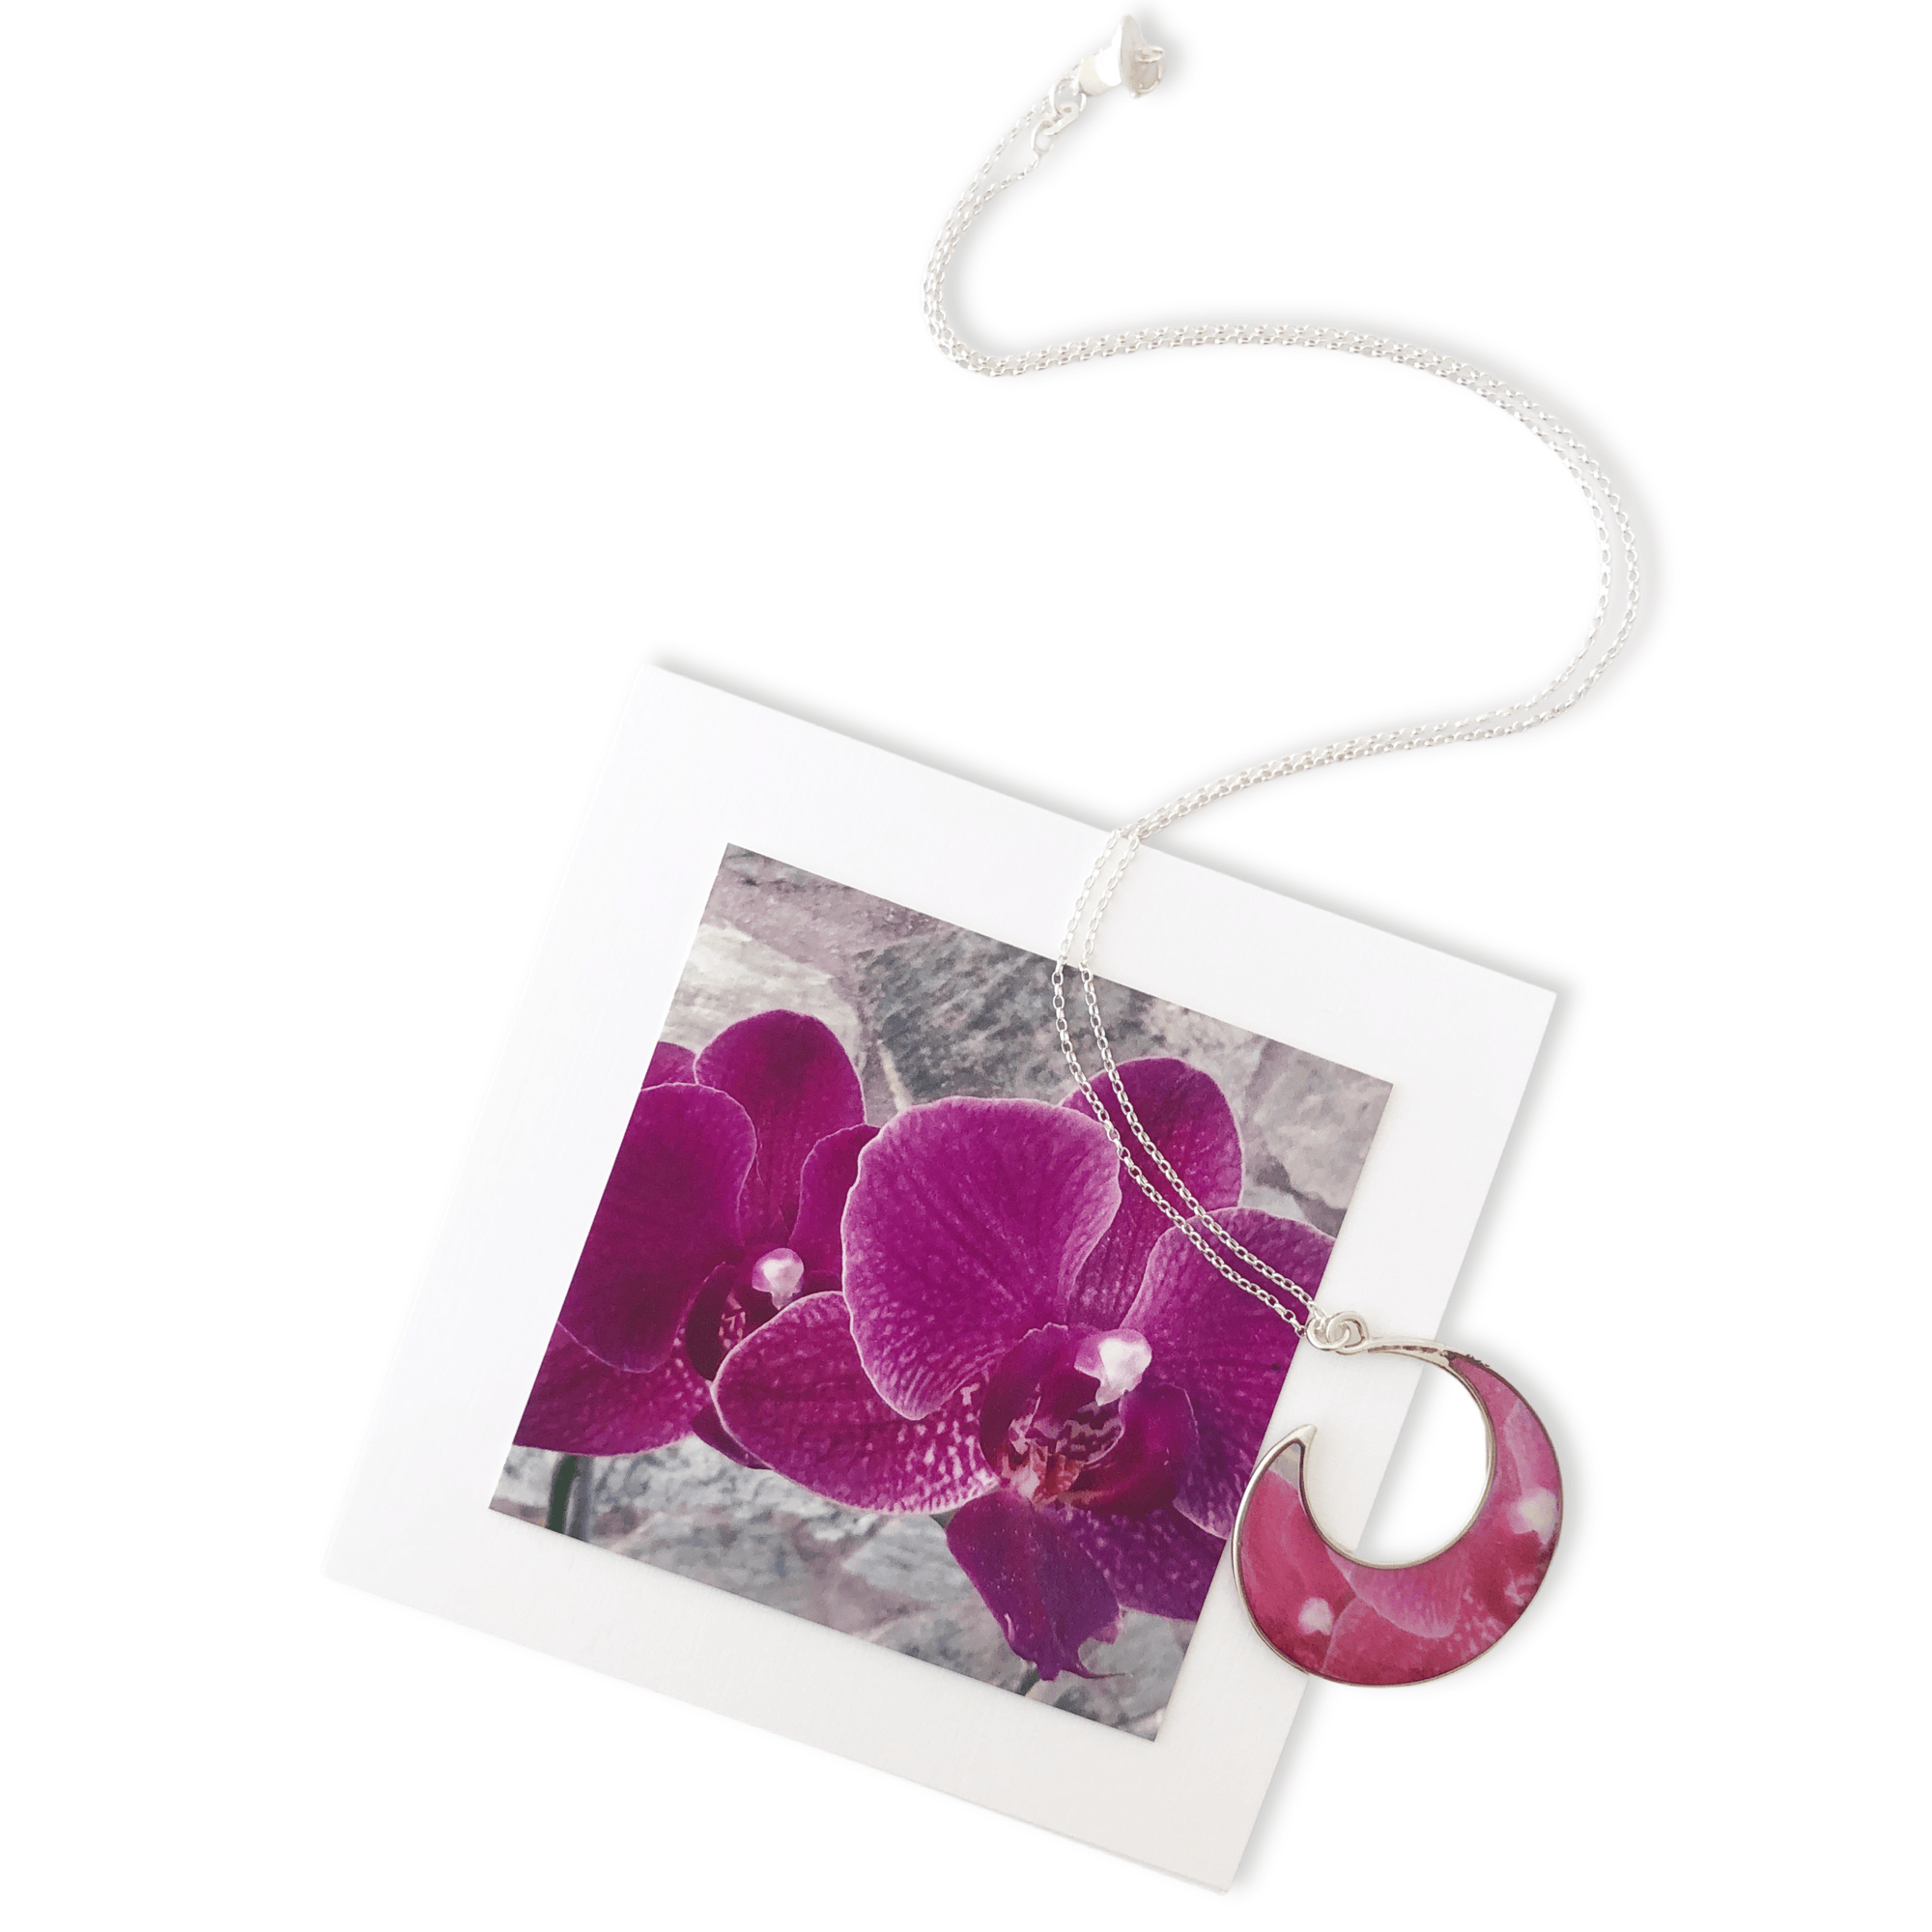 Costa Rican Orchid Necklace by Cara Koch